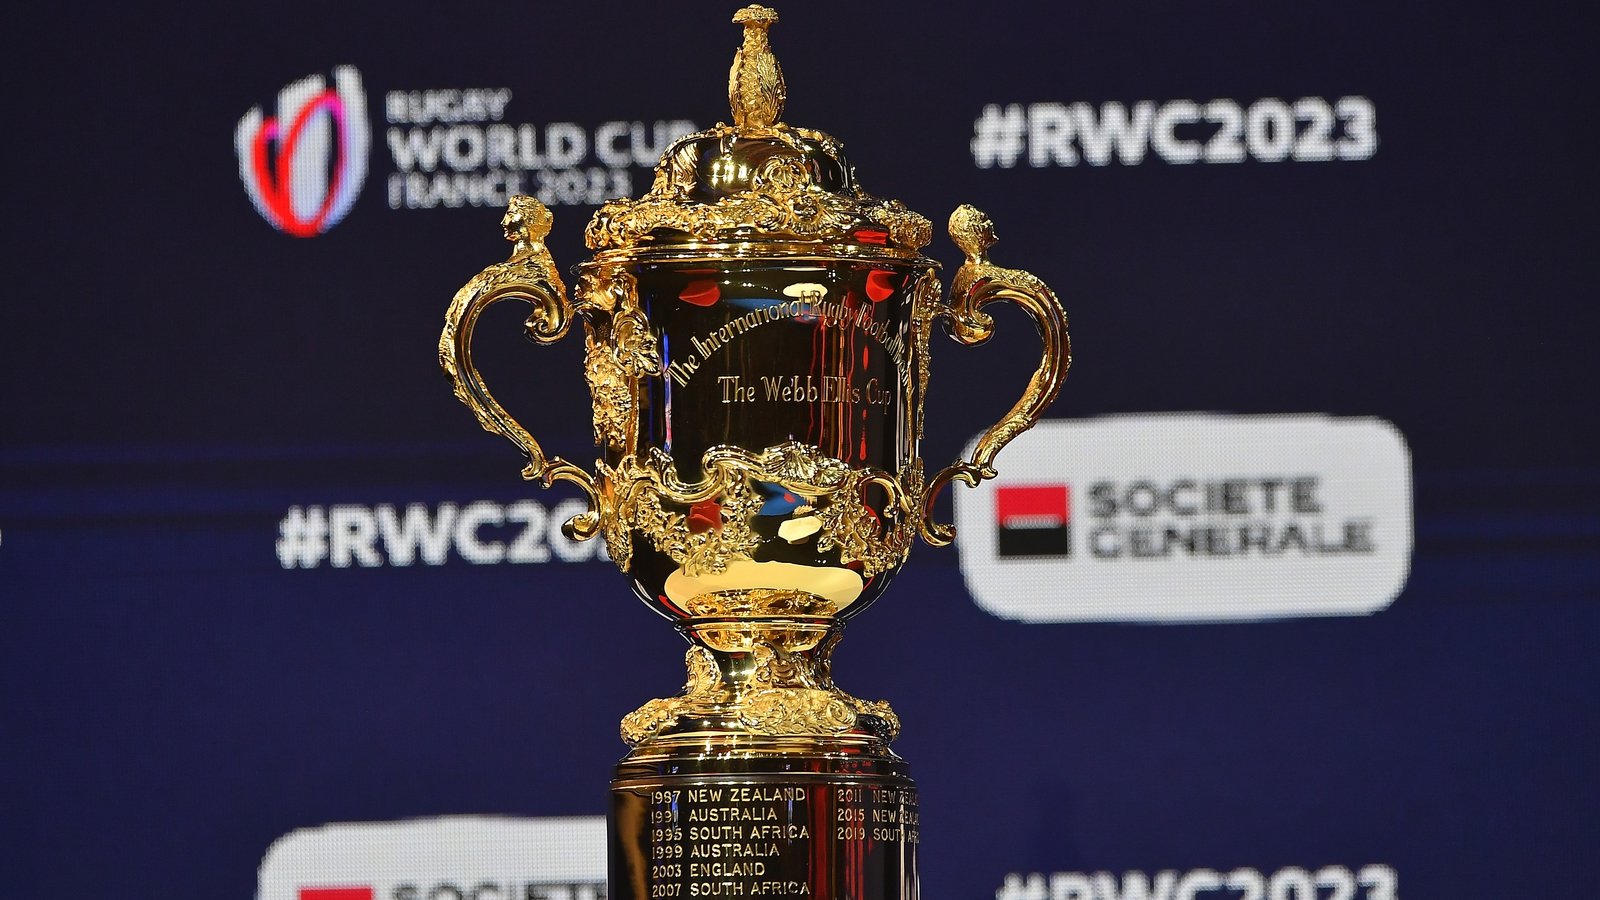 Rugby World Cup ticket details announced